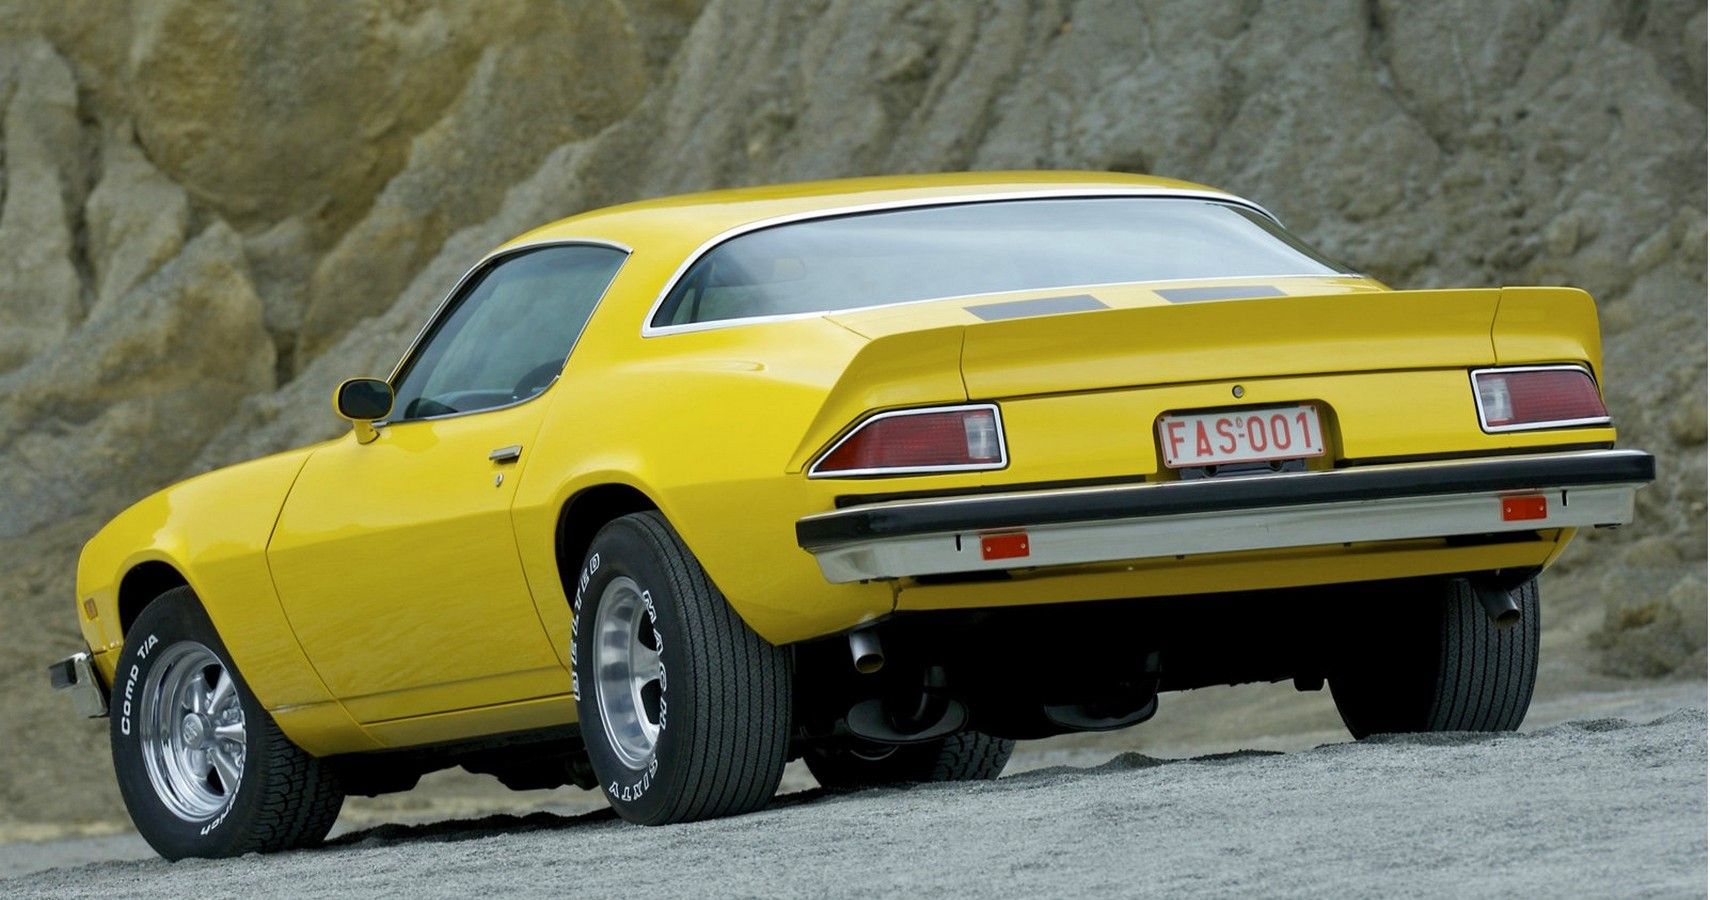 Yellow 1975 Chevrolet Camaro Parked Outside